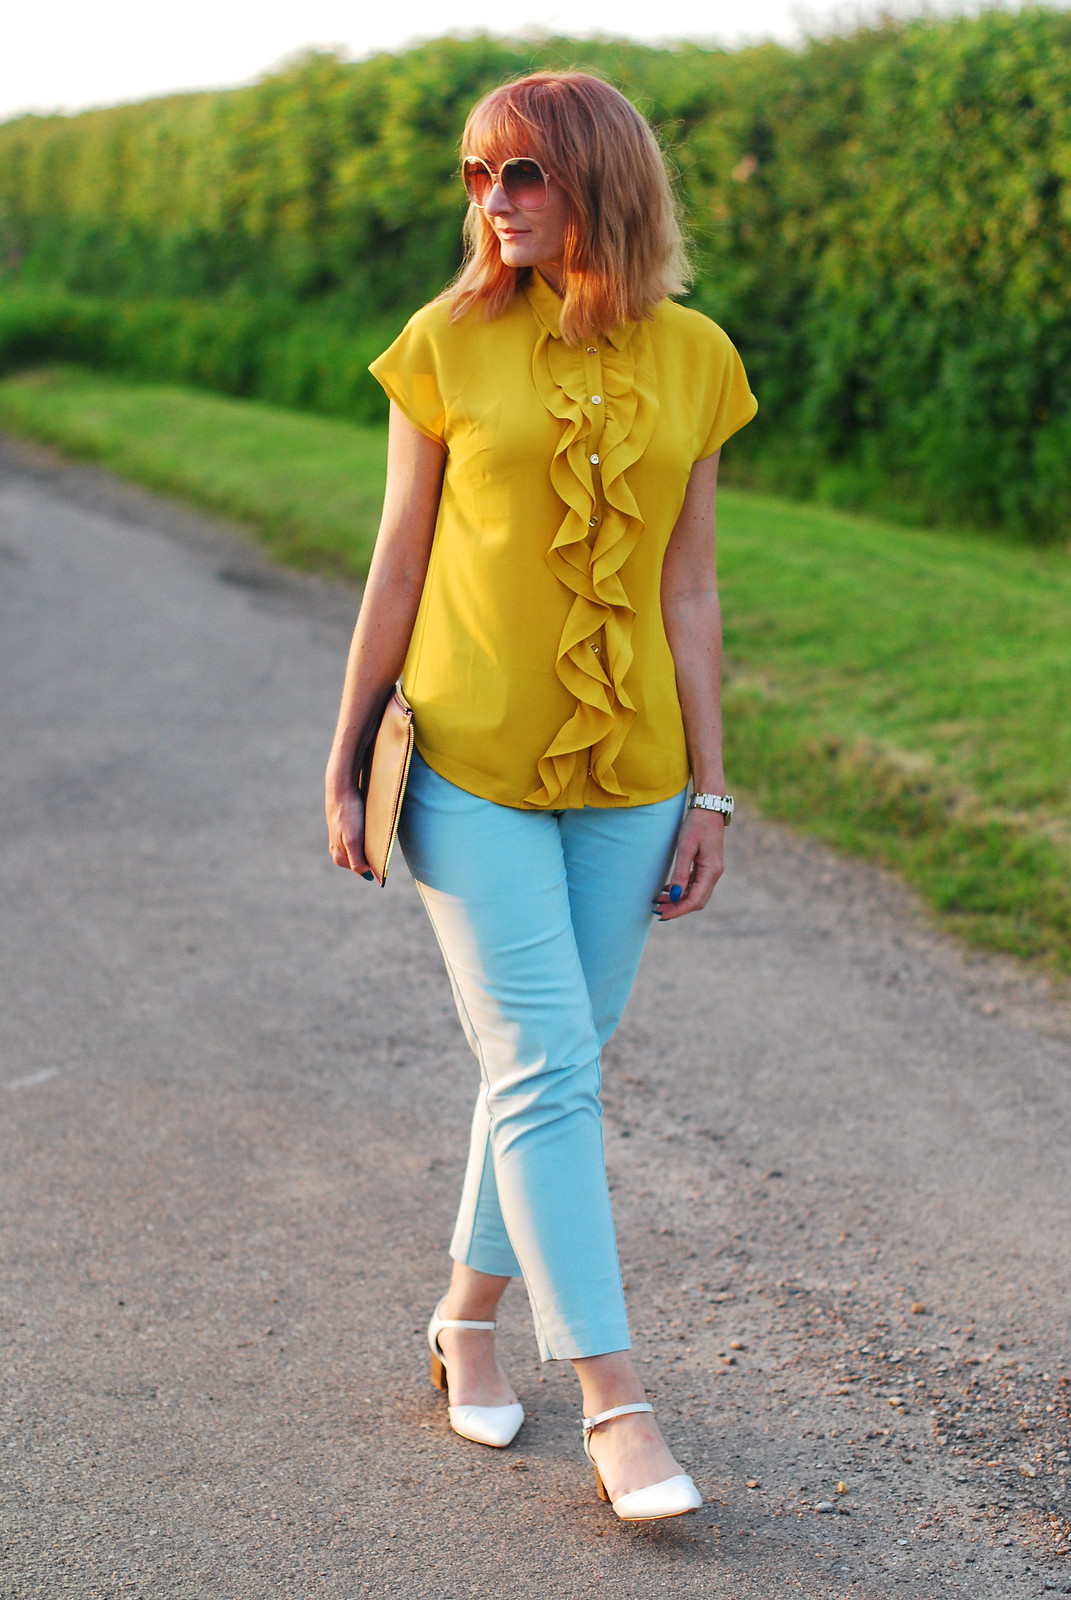 Summer brights: Ruffled yellow blouse, mint trousers, low pointed white heels, Jennifer Hamley Model KT Workbag clutch, oversized 70s sunglasses | Not Dressed As Lamb